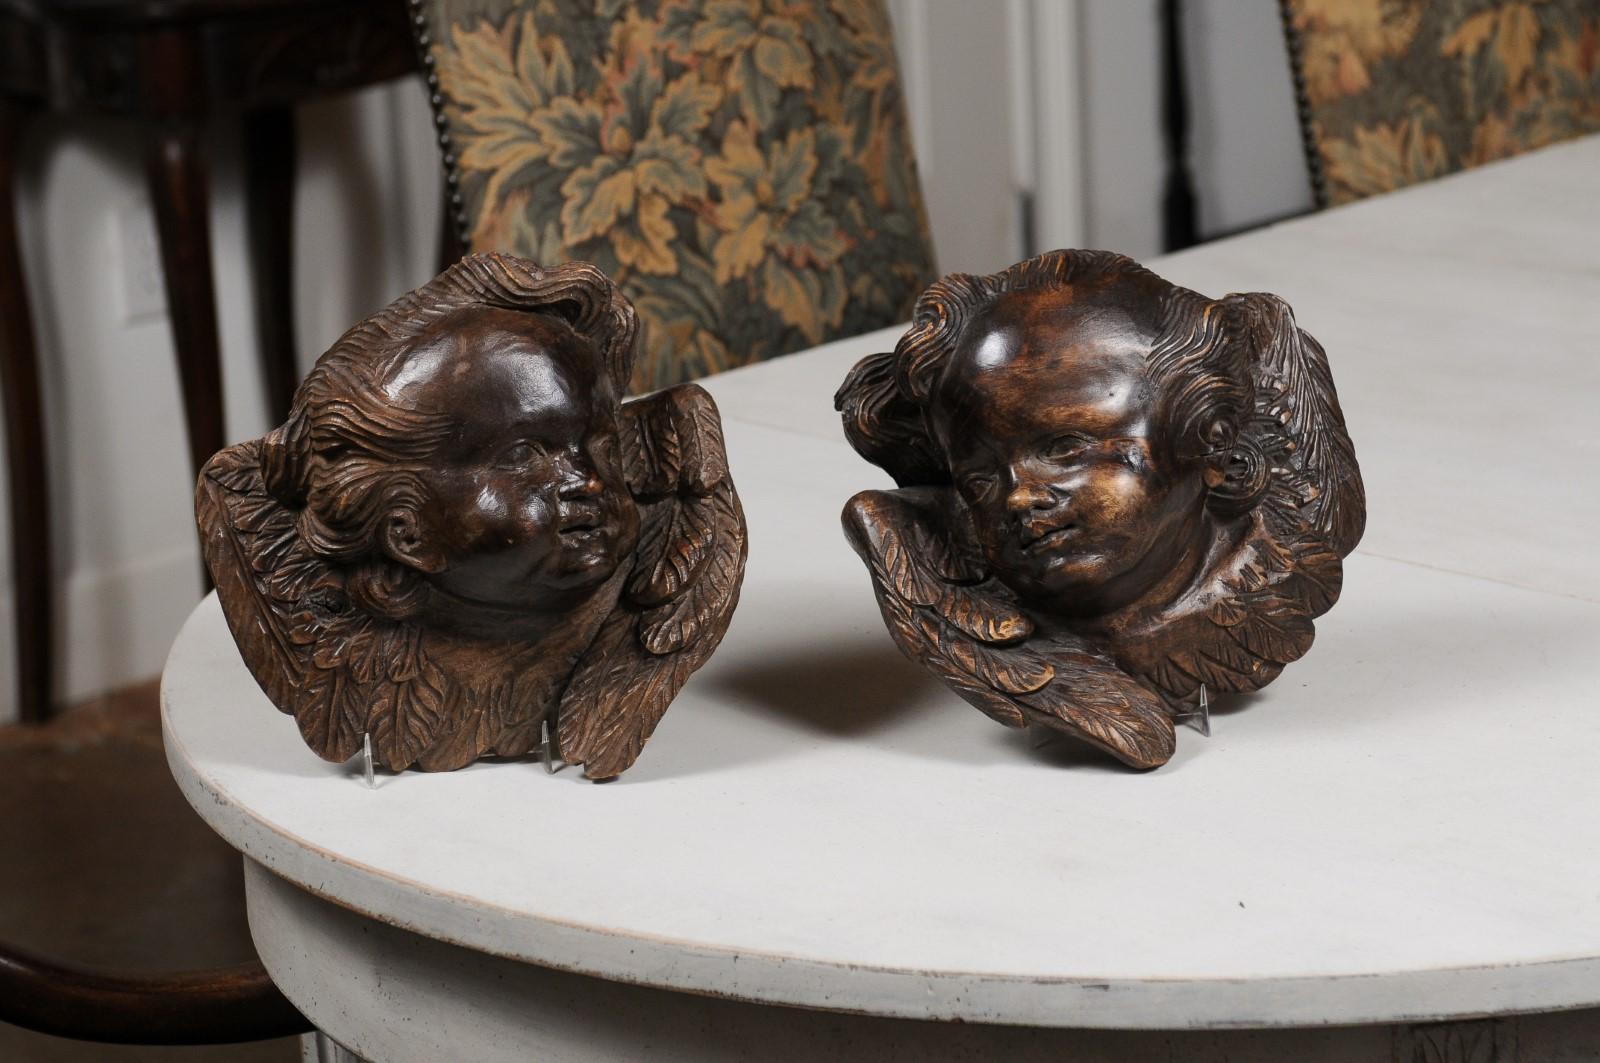 A pair of French walnut wall hanging cherub sculptures from the 19th century, with dark patina. Created in France during the 19th century, each of this pair of nicely carved wall hanging sculptures depicts a chubby cherub face surrounded by